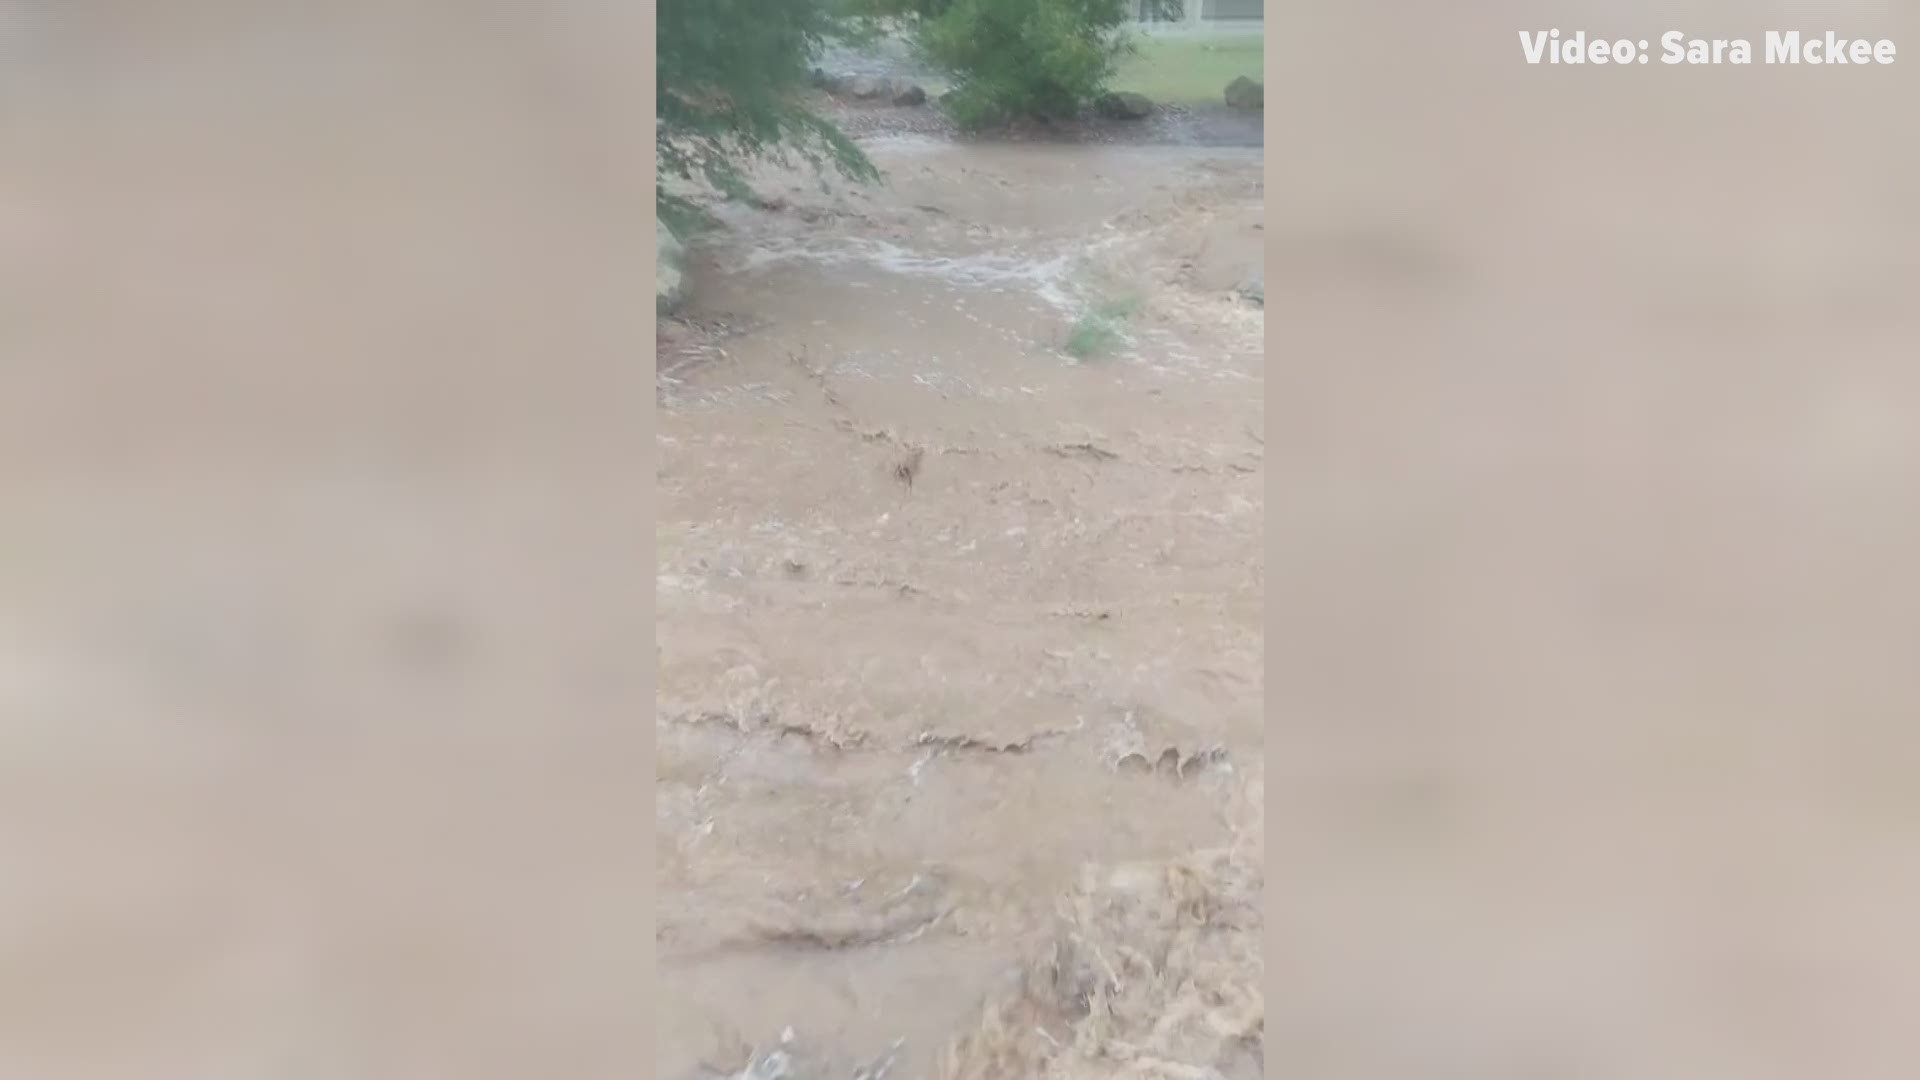 Here's what the Arizona Grand Golf Course looked like the morning of Oct. 2, 2018. Video: Sara Mckee